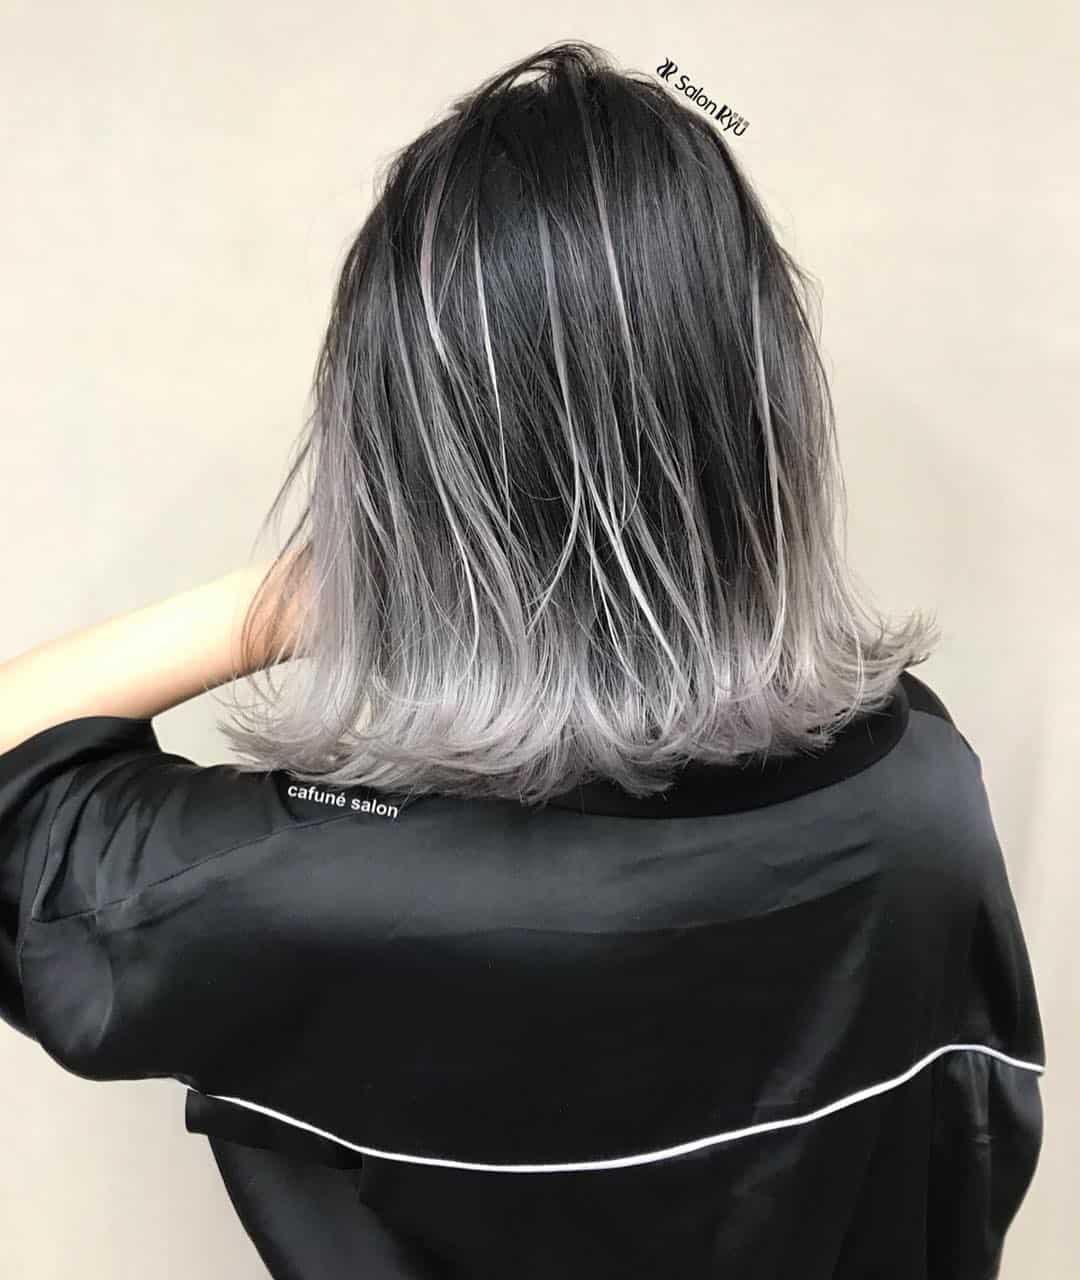 28 Brilliant Colored Balayage That Pop On Black Hair